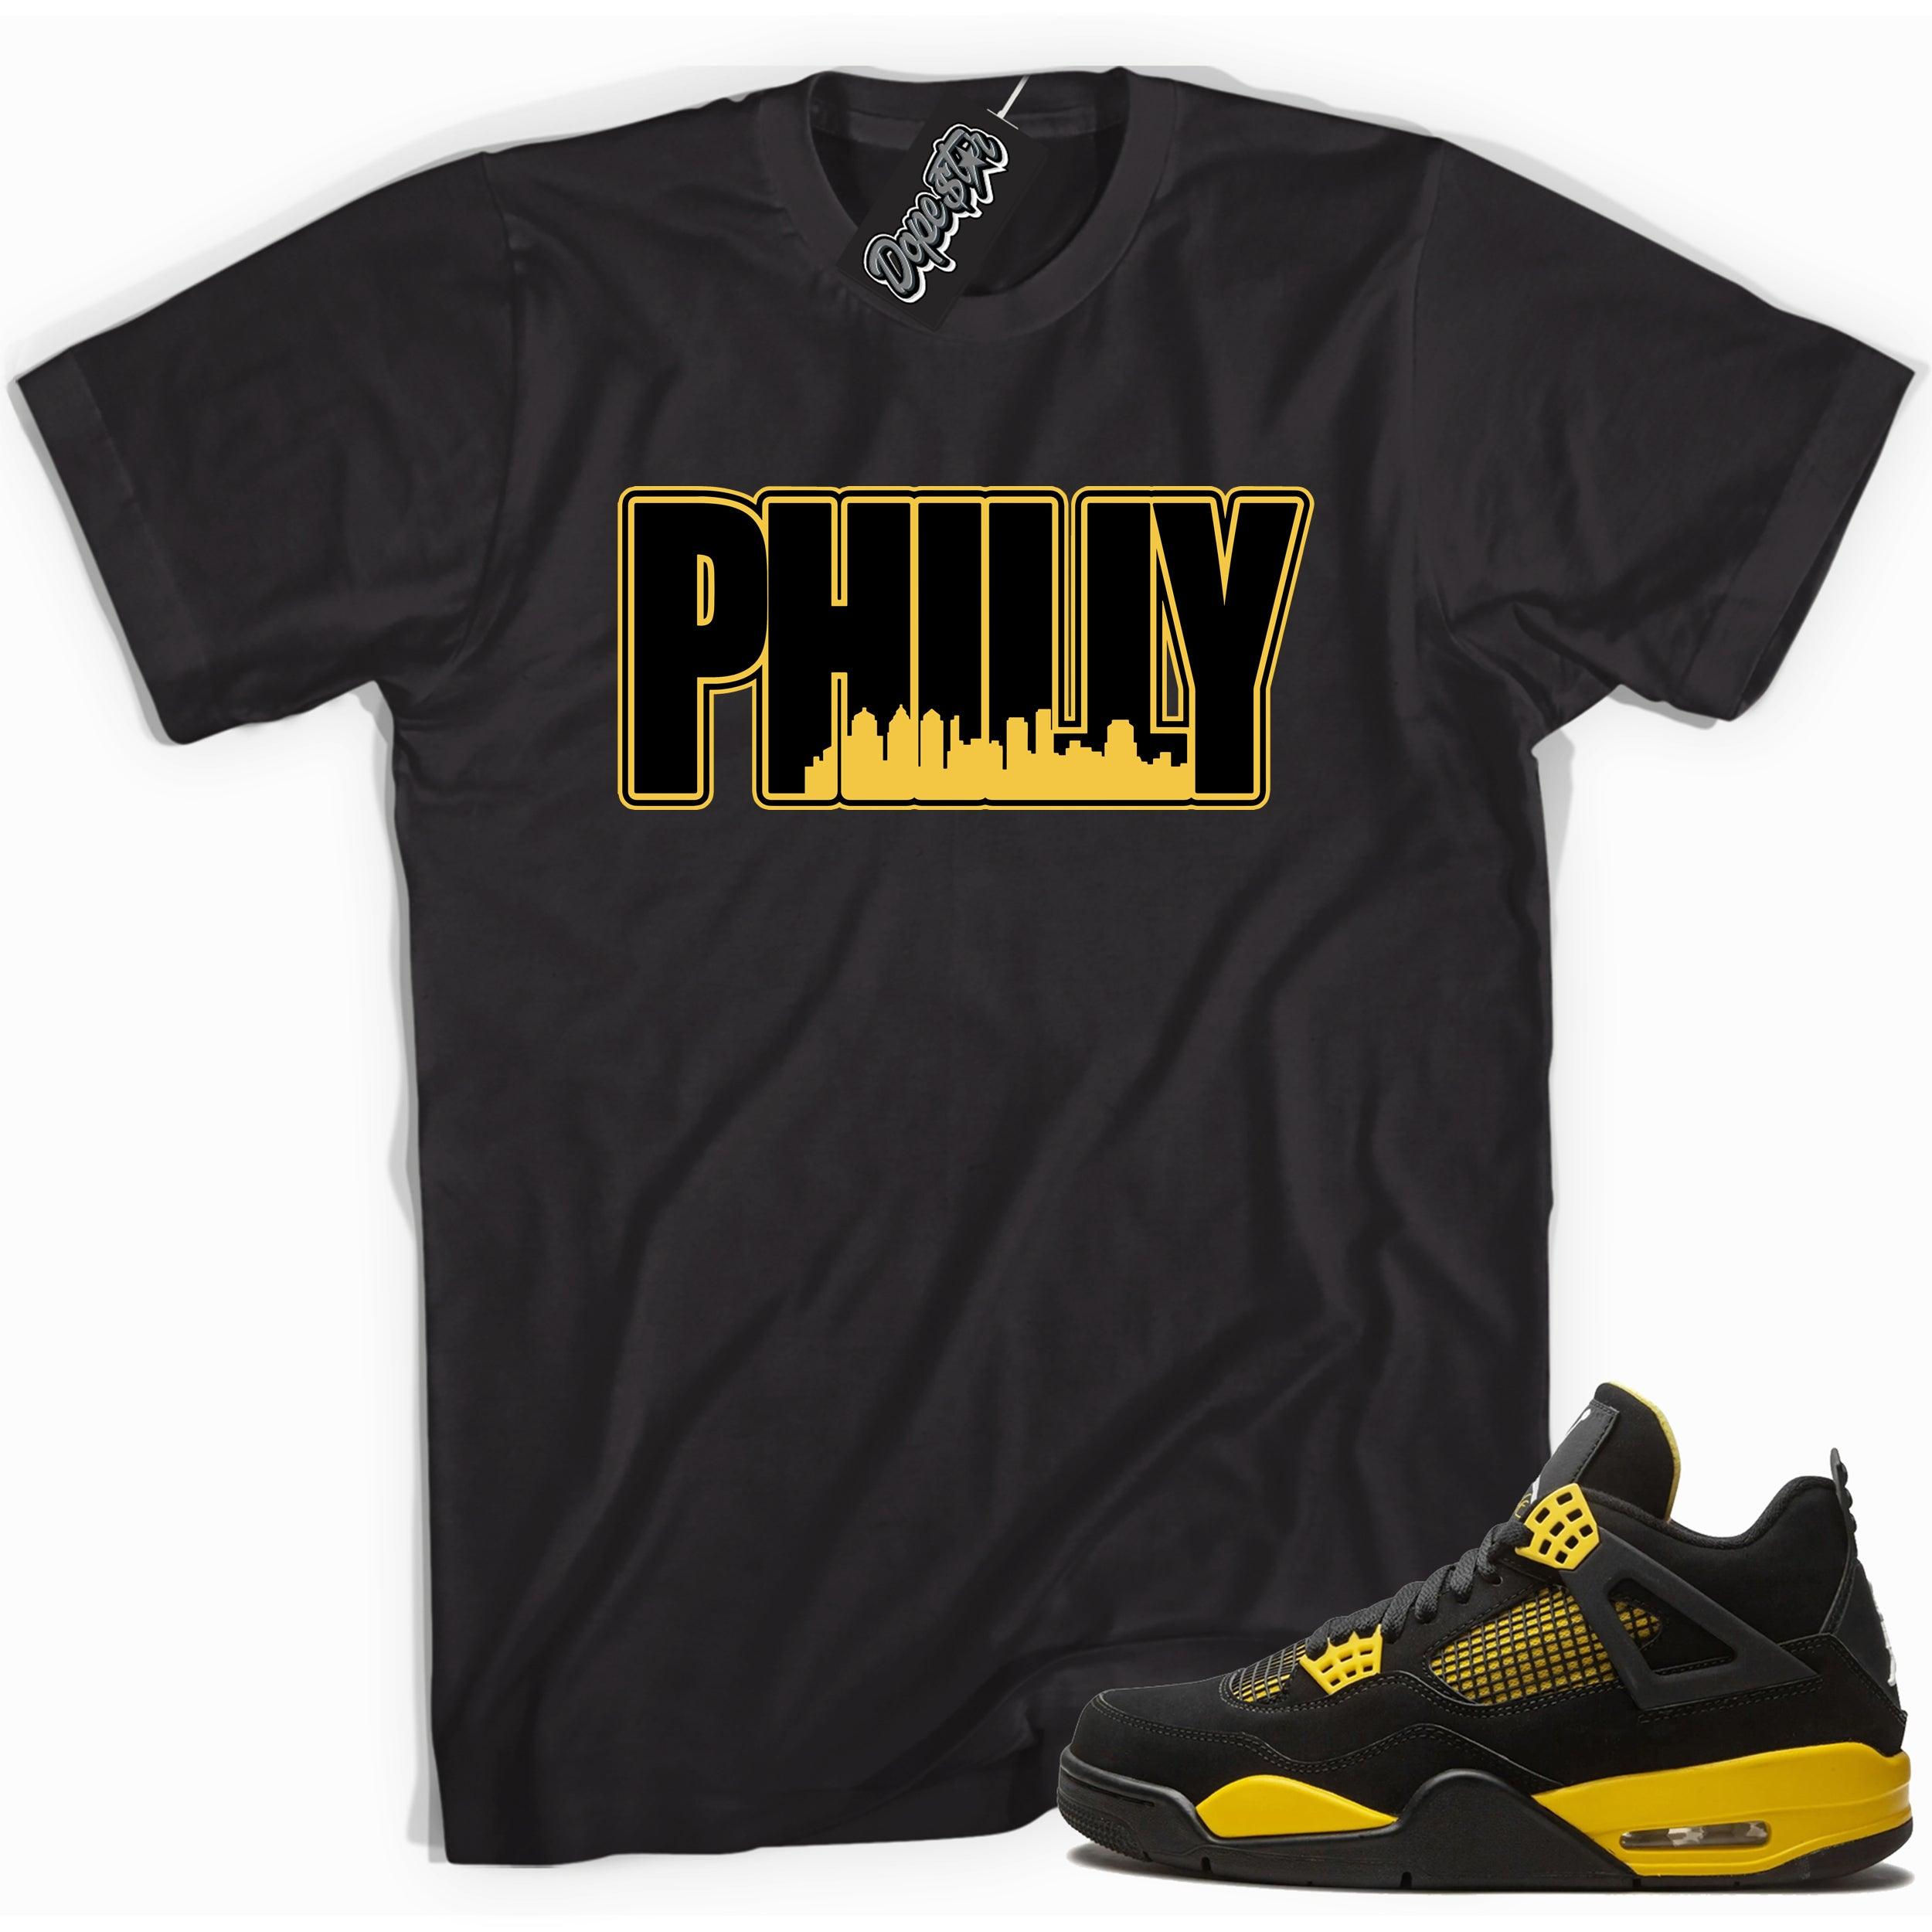 Cool black graphic tee with 'philly' print, that perfectly matches  Air Jordan 4 Thunder sneakers